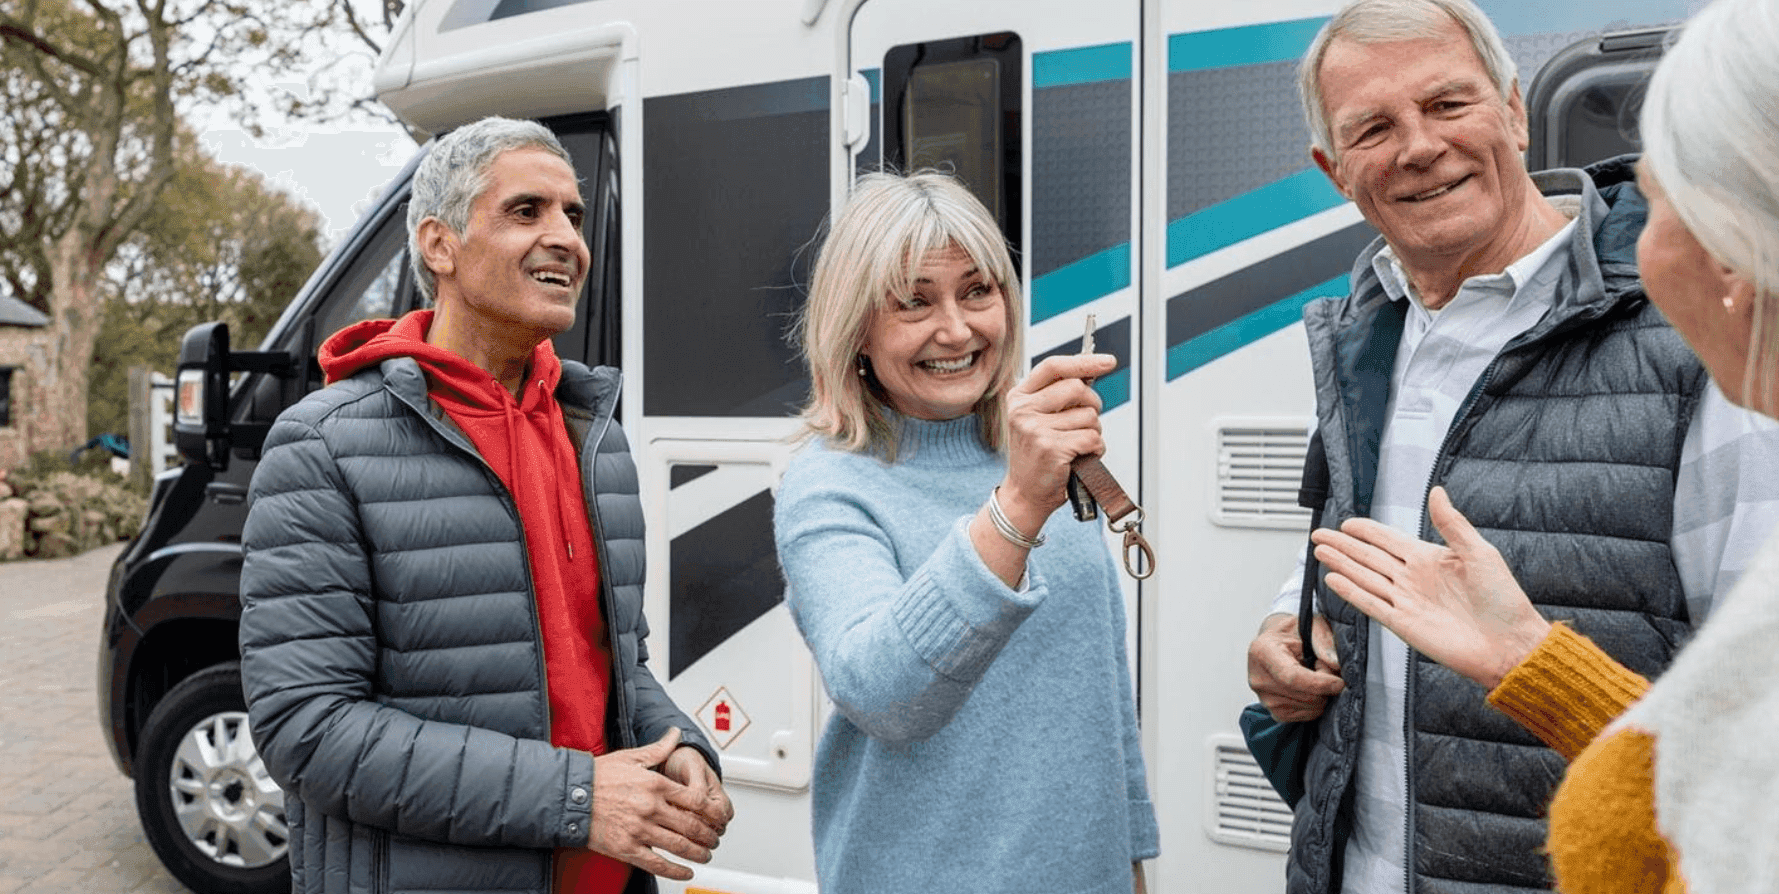 How to buy or sell an RV as a peer-to-peer transaction